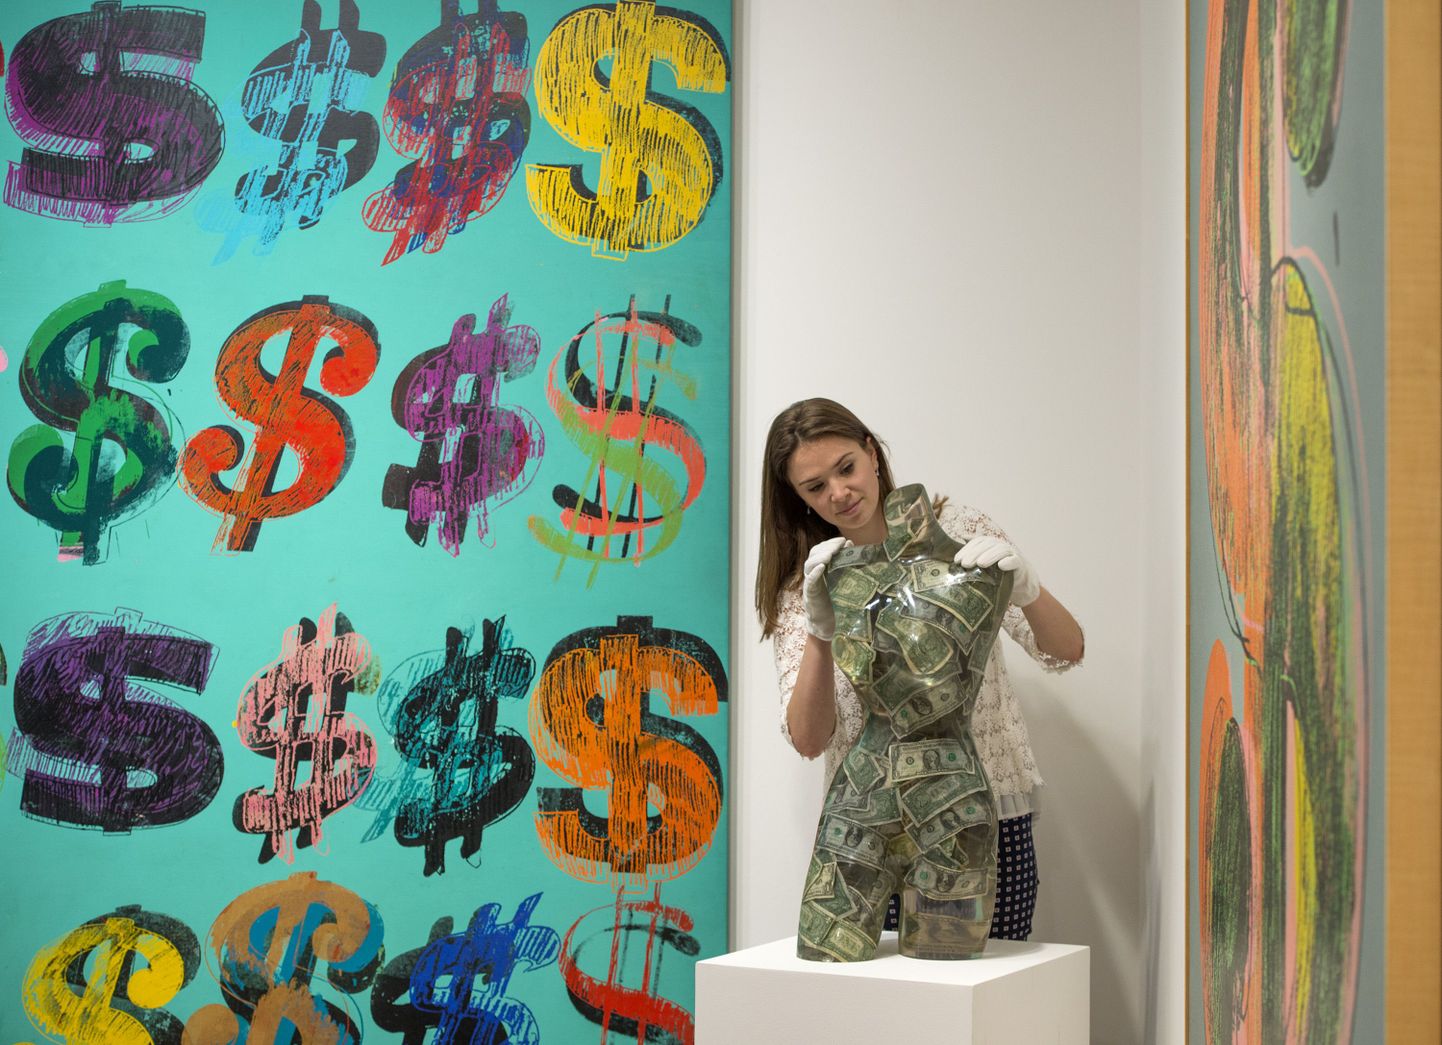 A gallery assistant poses with 'Venus aux dollars, 1970' by Arman, estimated ÃÂ£16-ÃÂ£22,000, beside 'Dollar Signs, 1981' by Andy Warhol, estimated at ÃÂ£4.5-ÃÂ£6.5 million, (left) during the press preview of 'To The Bearer On Demand', a private collection of 21 works inspired by the US Dollar by artists including Andy Warhol at Sotheby's, London.